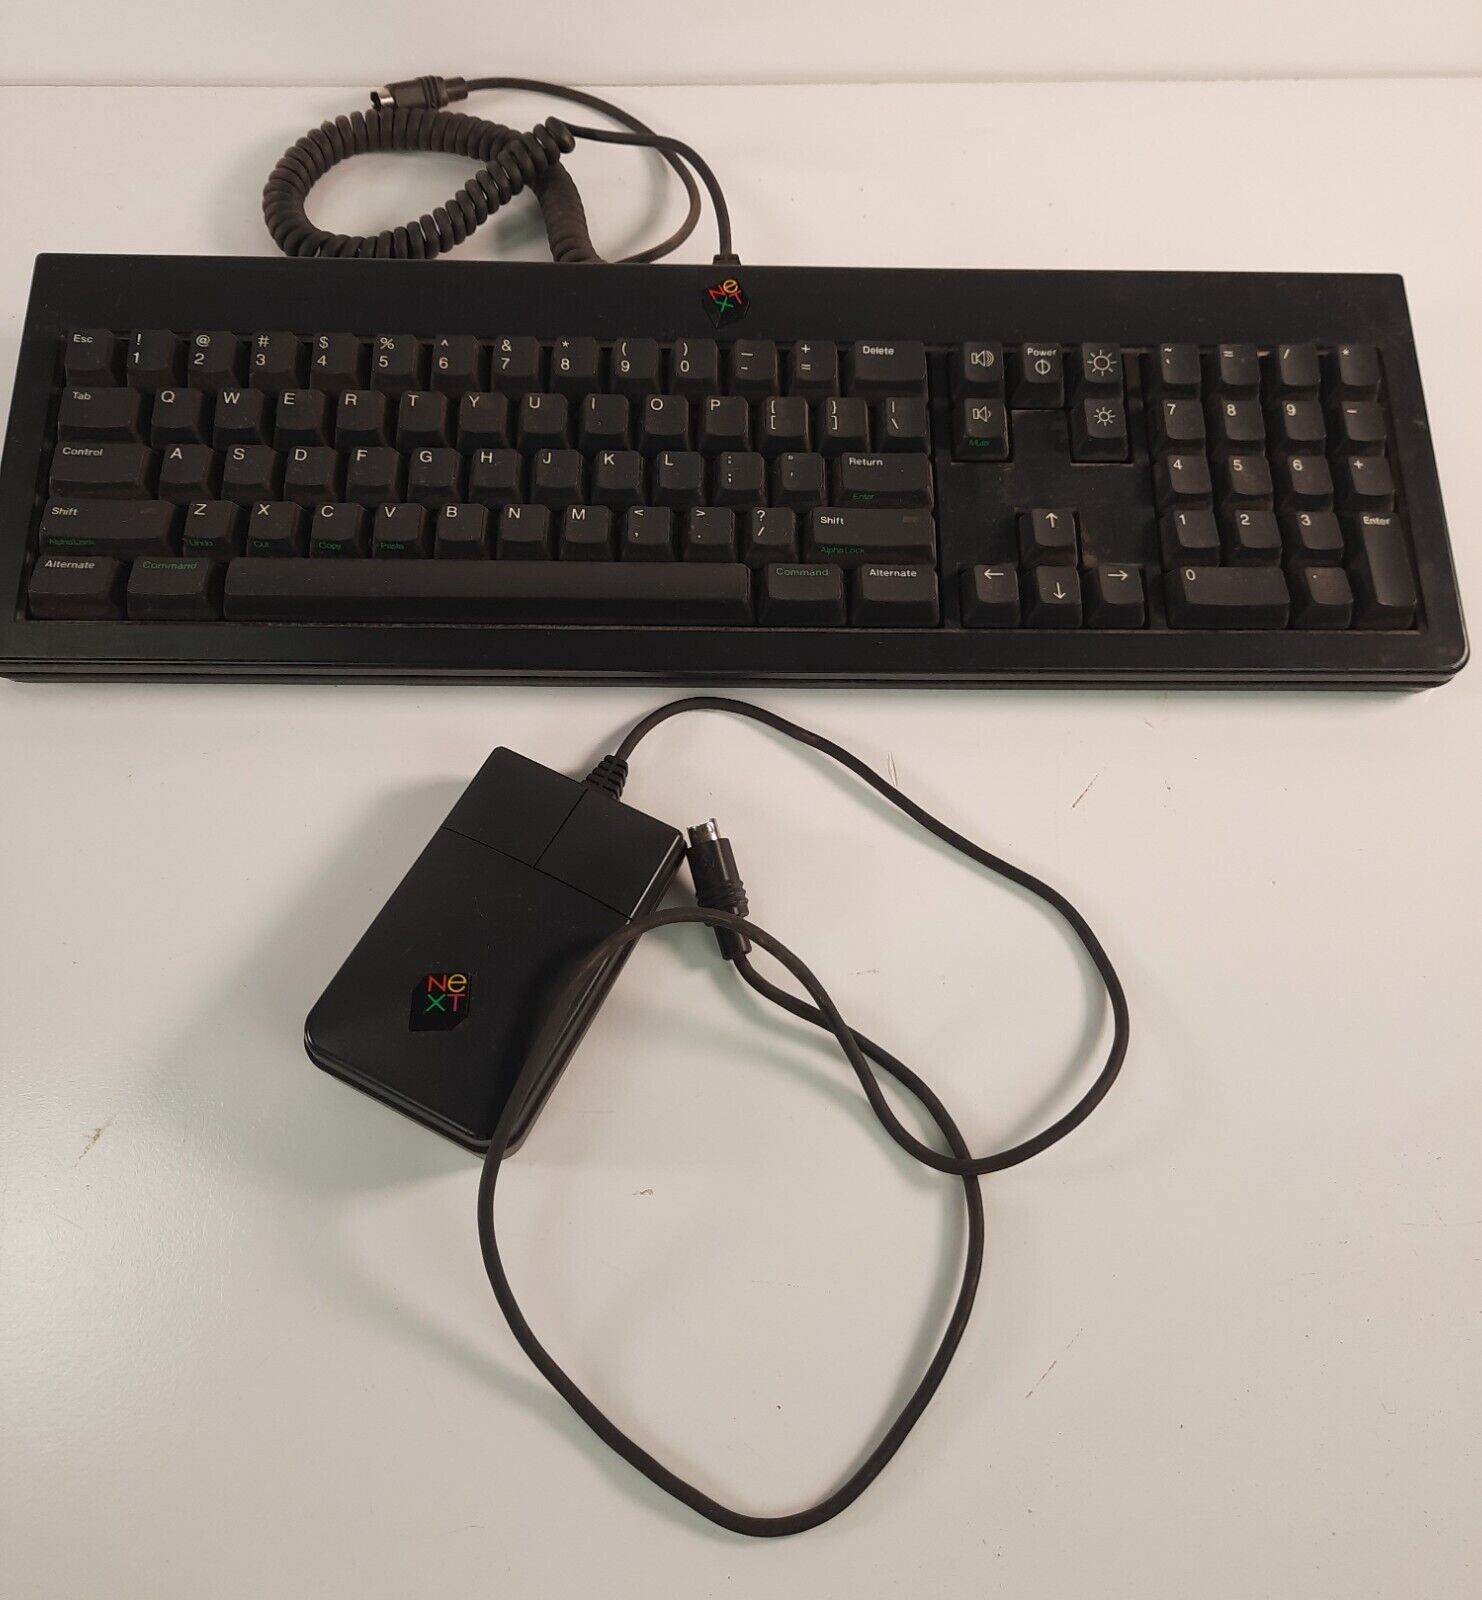 Rare Vintage NeXT Computer Keyboard 192 & Mouse 193 Working with Good Condition